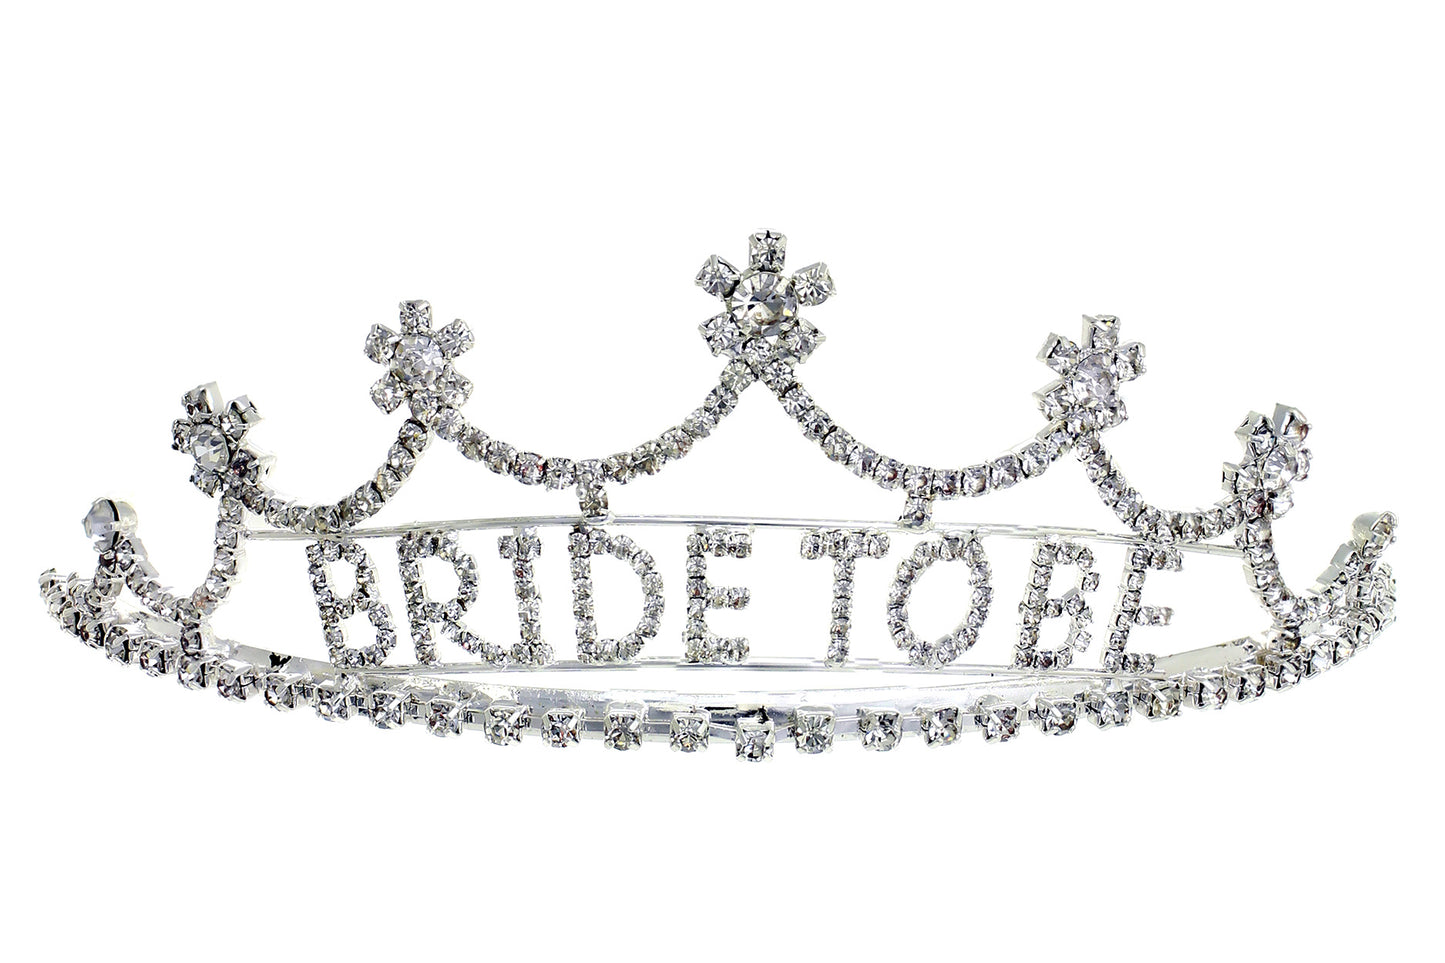 Bride To Be Tiara in Silver